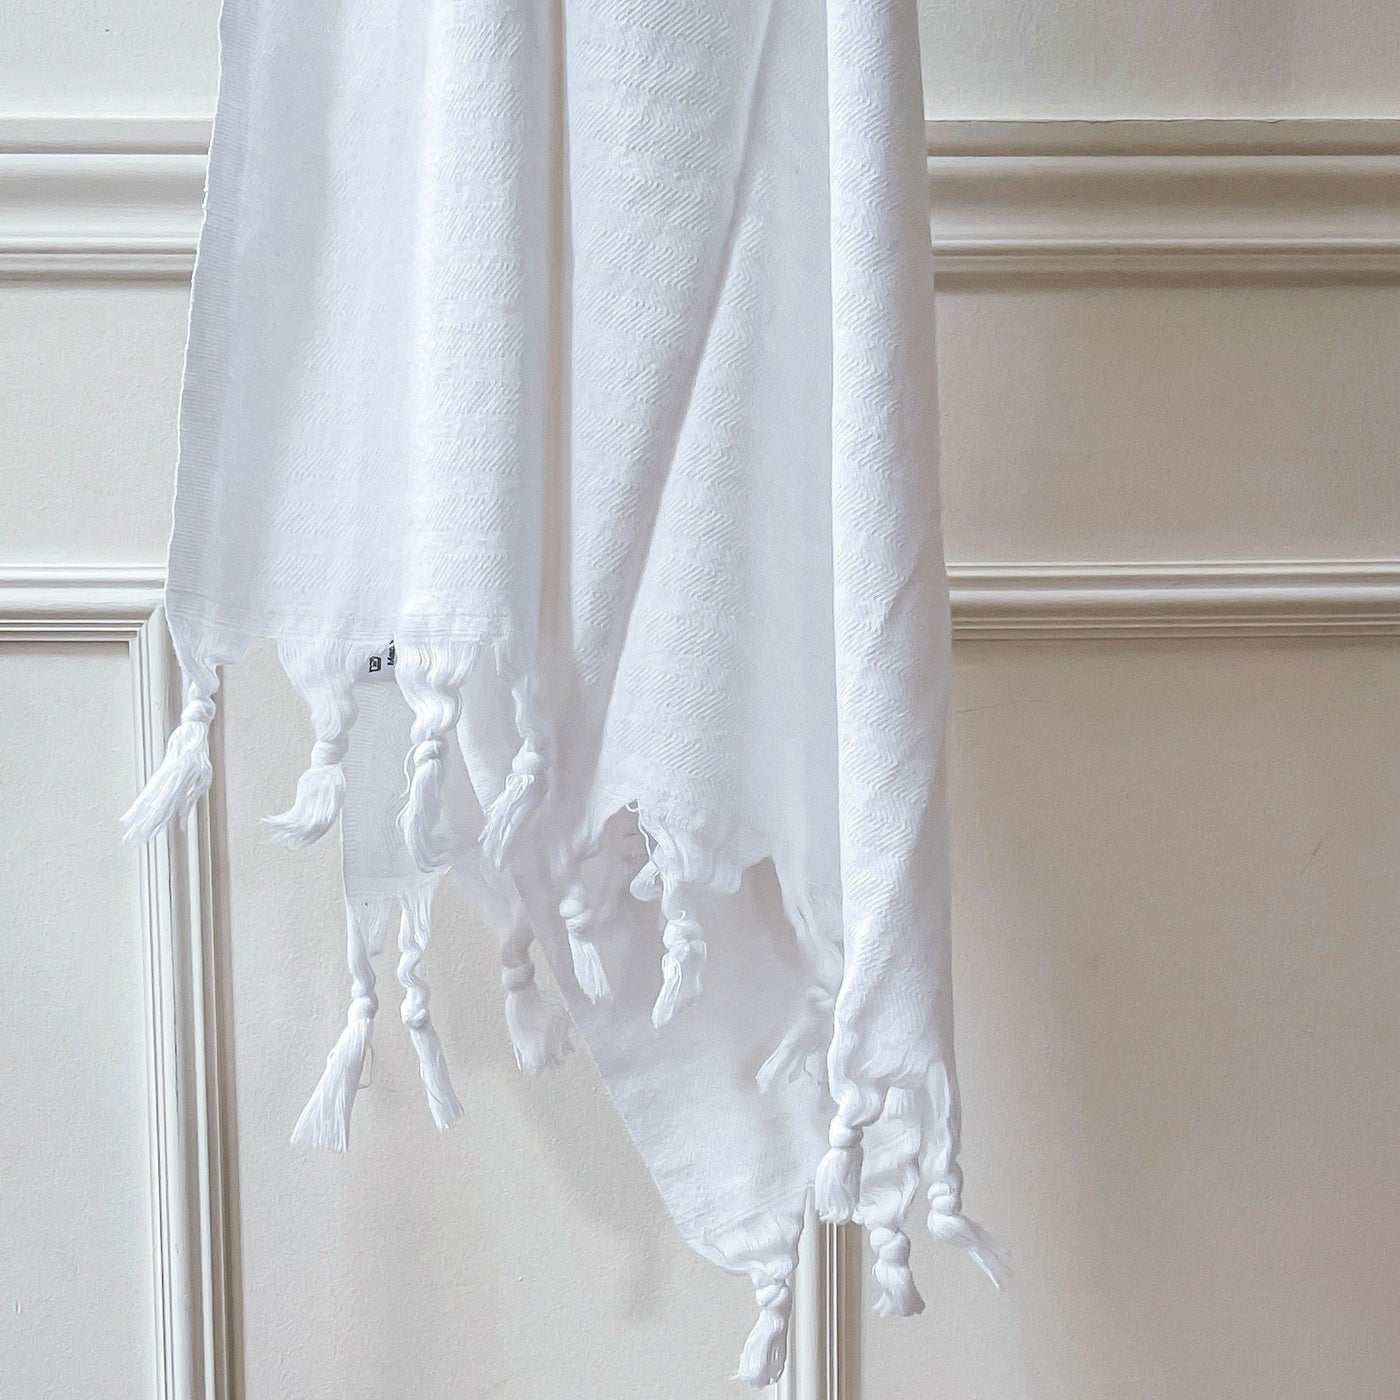 Turkish Towel: Colour: White, Size: Oversized 63" x 39.4", SKU OVT011 - By House of Jude